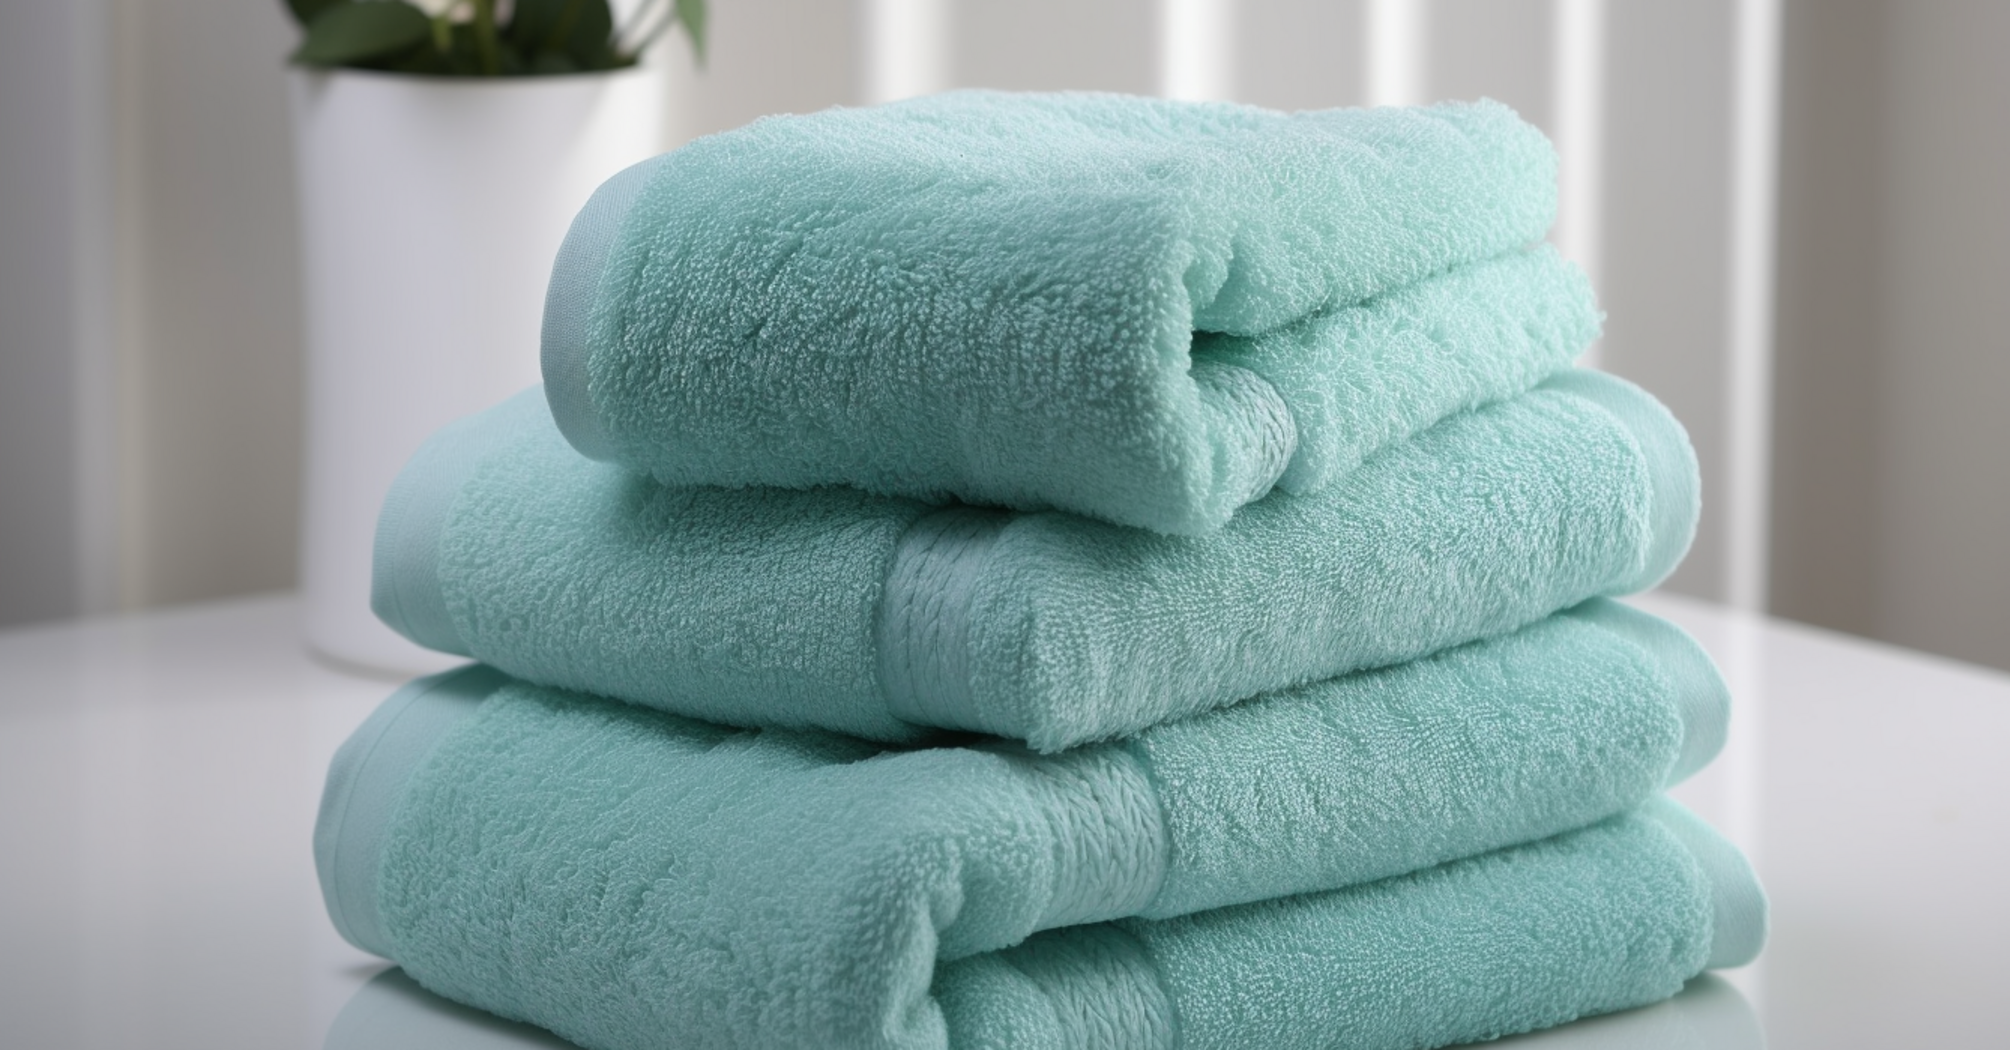 How to wash new towels for beyond soft results - Saga Exceptional